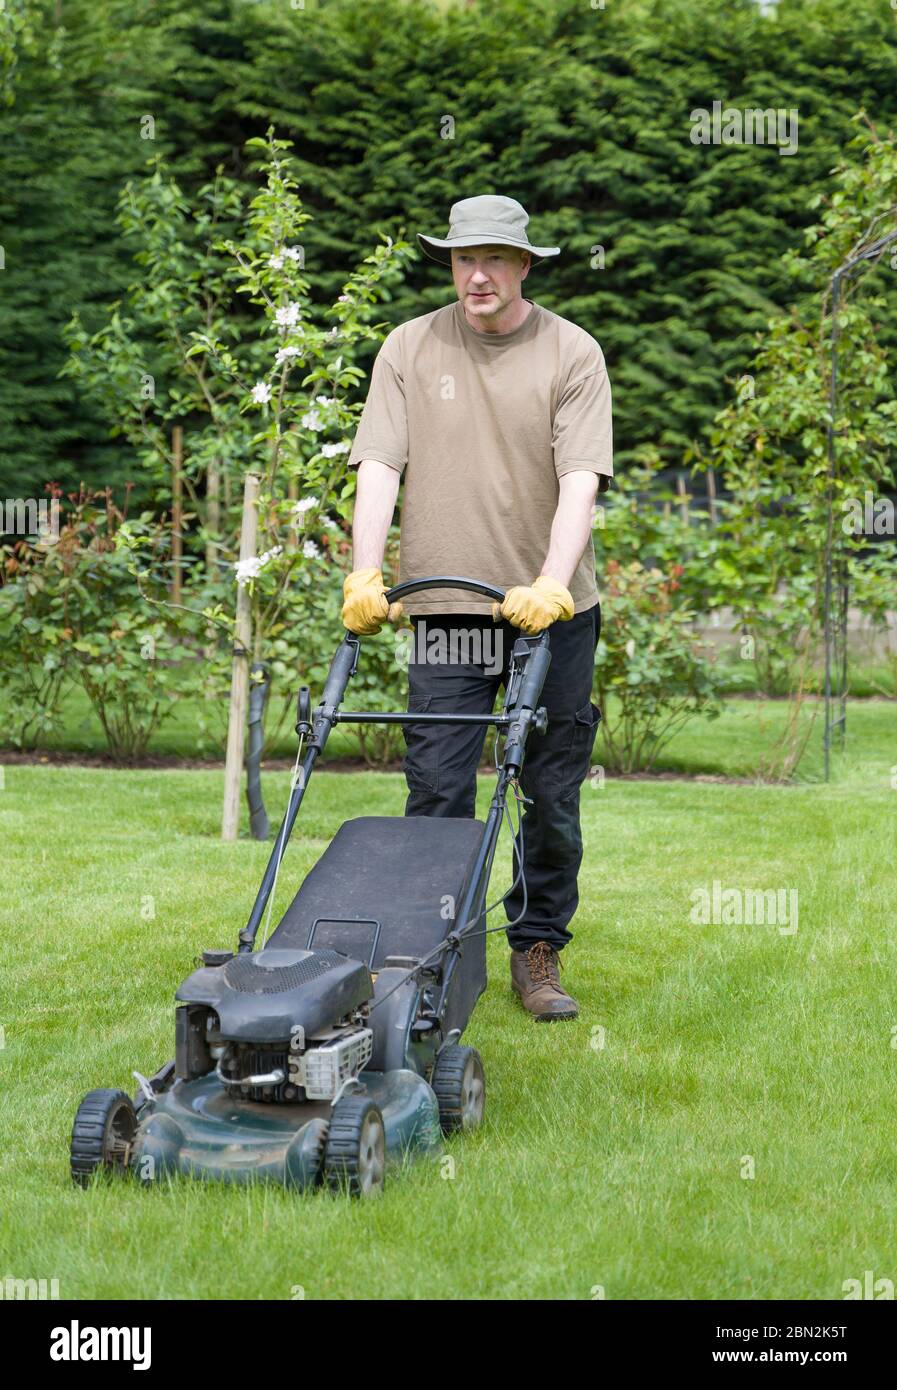 Male gardener mowing a lawn in a garden with a petrol lawn mower, UK Stock Photo